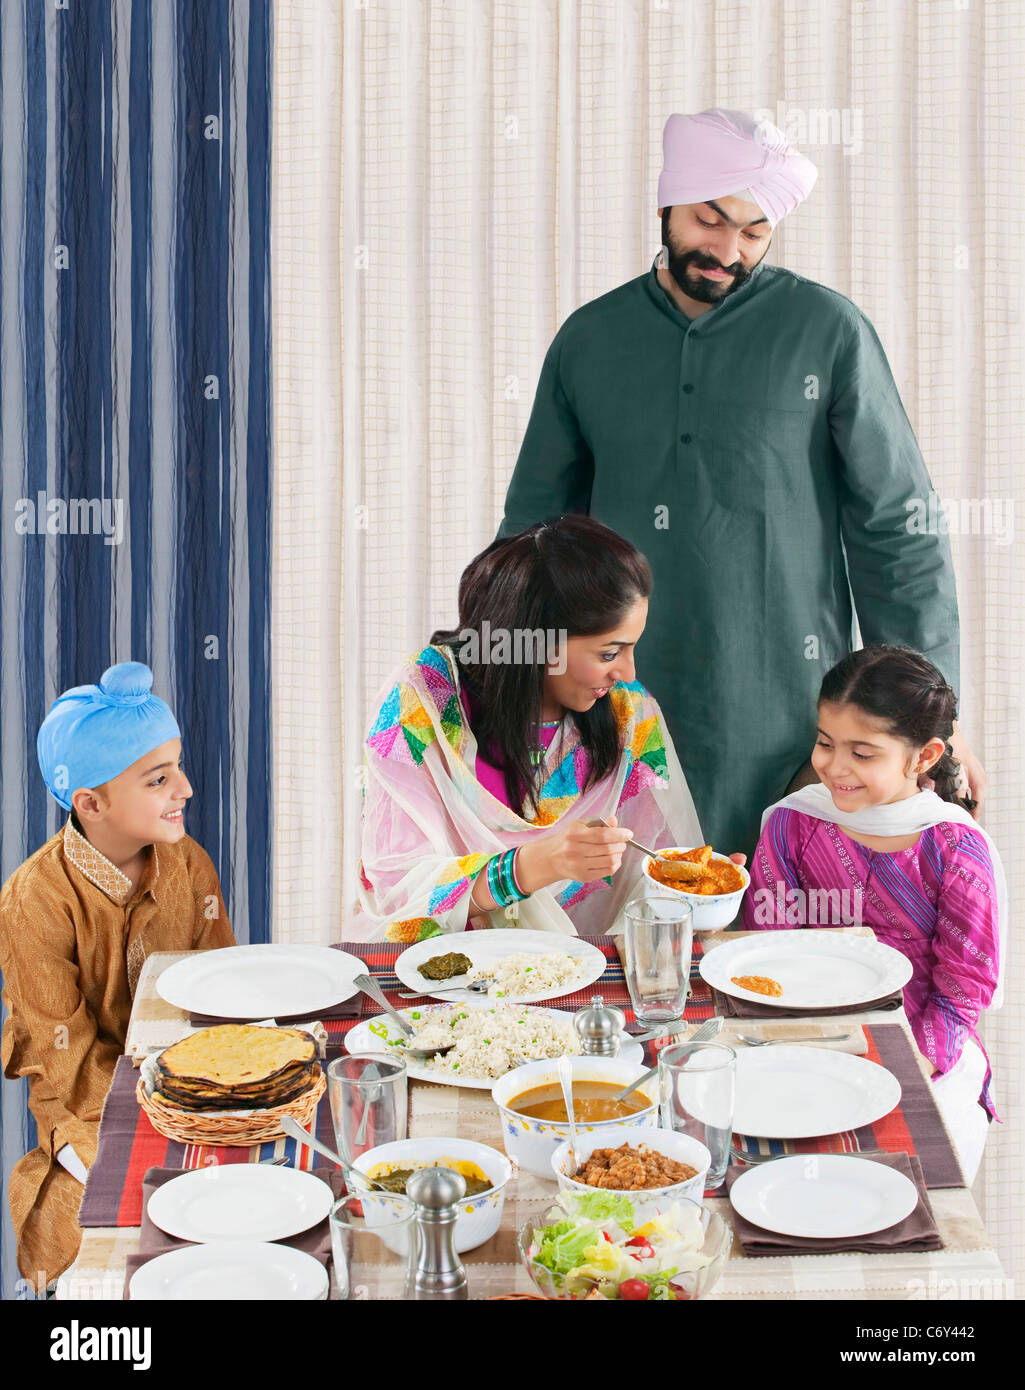 Mother serving her daughter some food Stock Photo